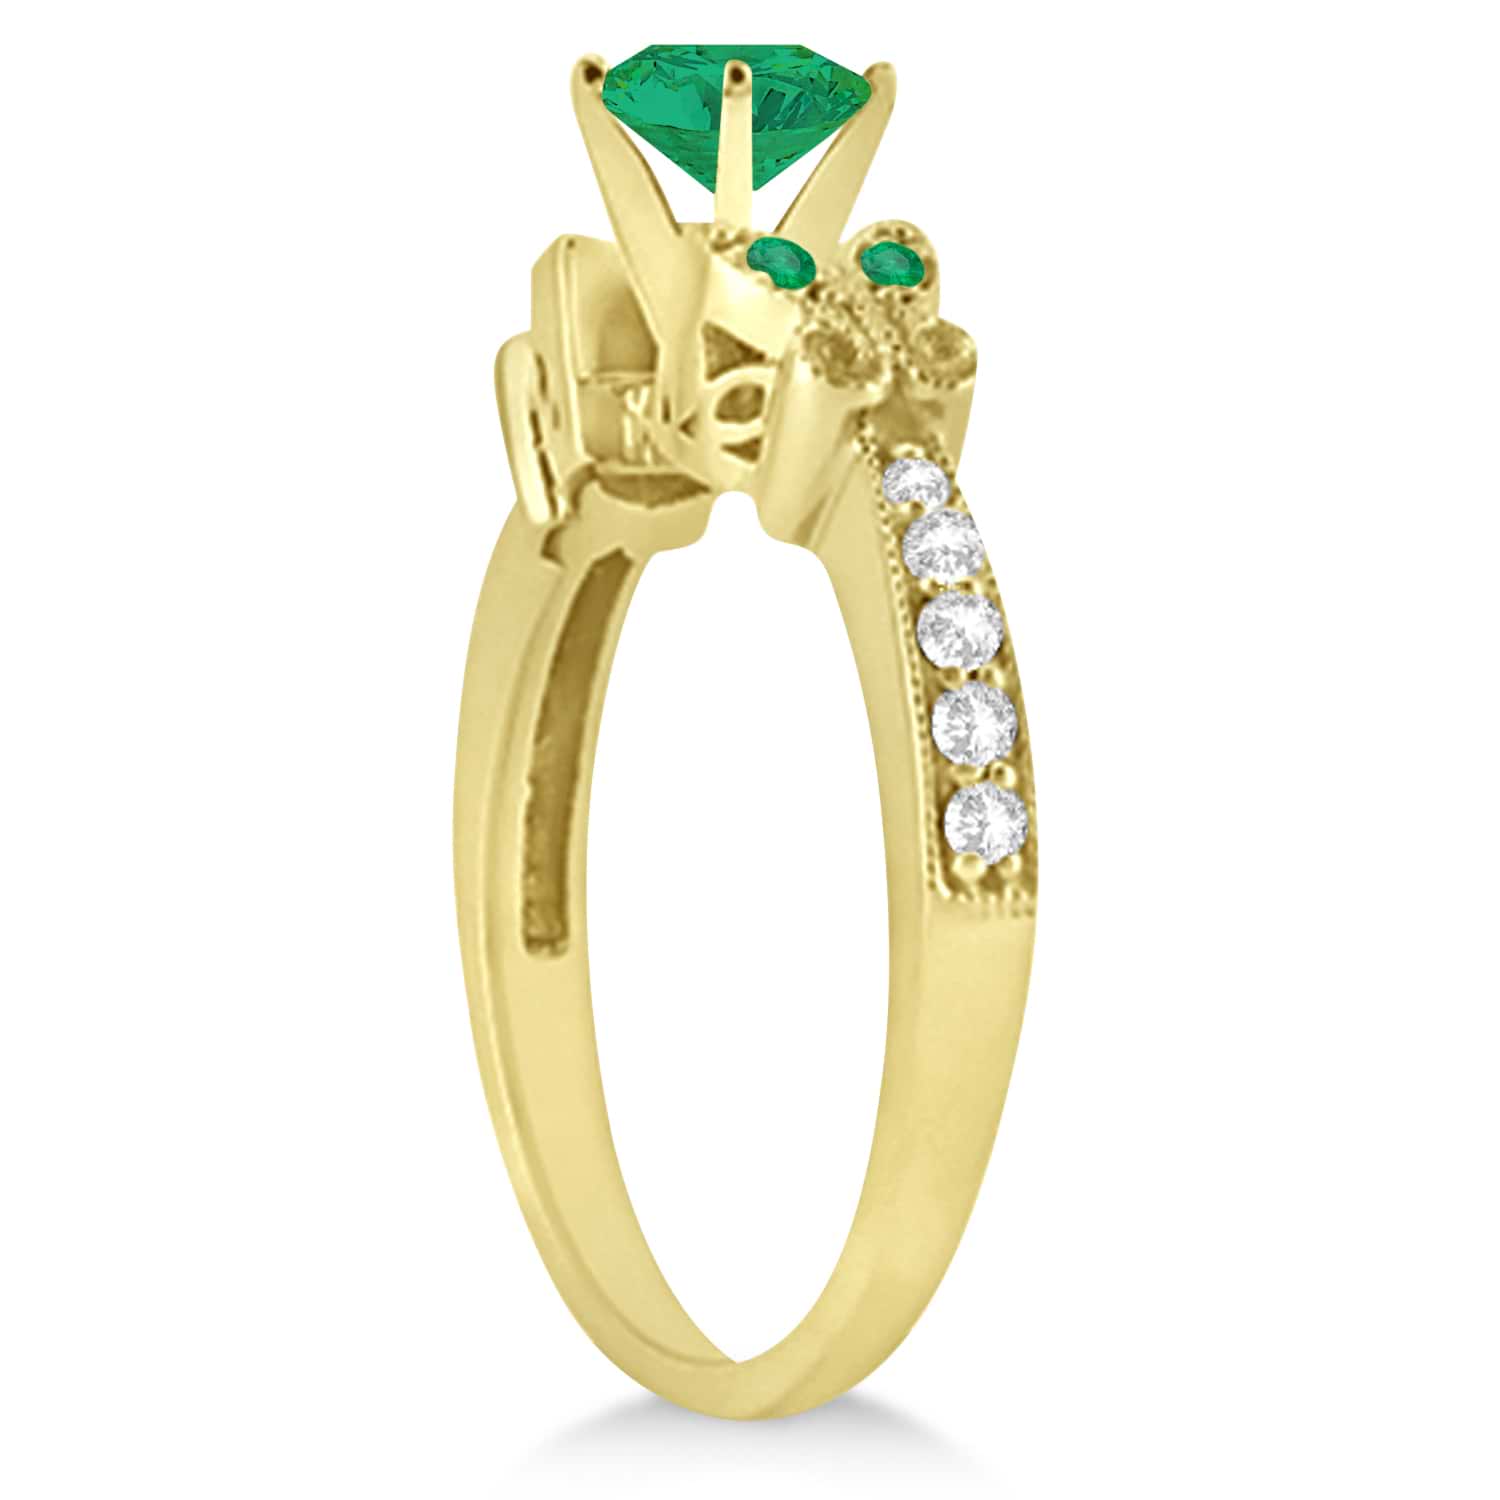 Butterfly Genuine Emerald & Diamond Engagement Ring 18K Yellow Gold 1.11ct